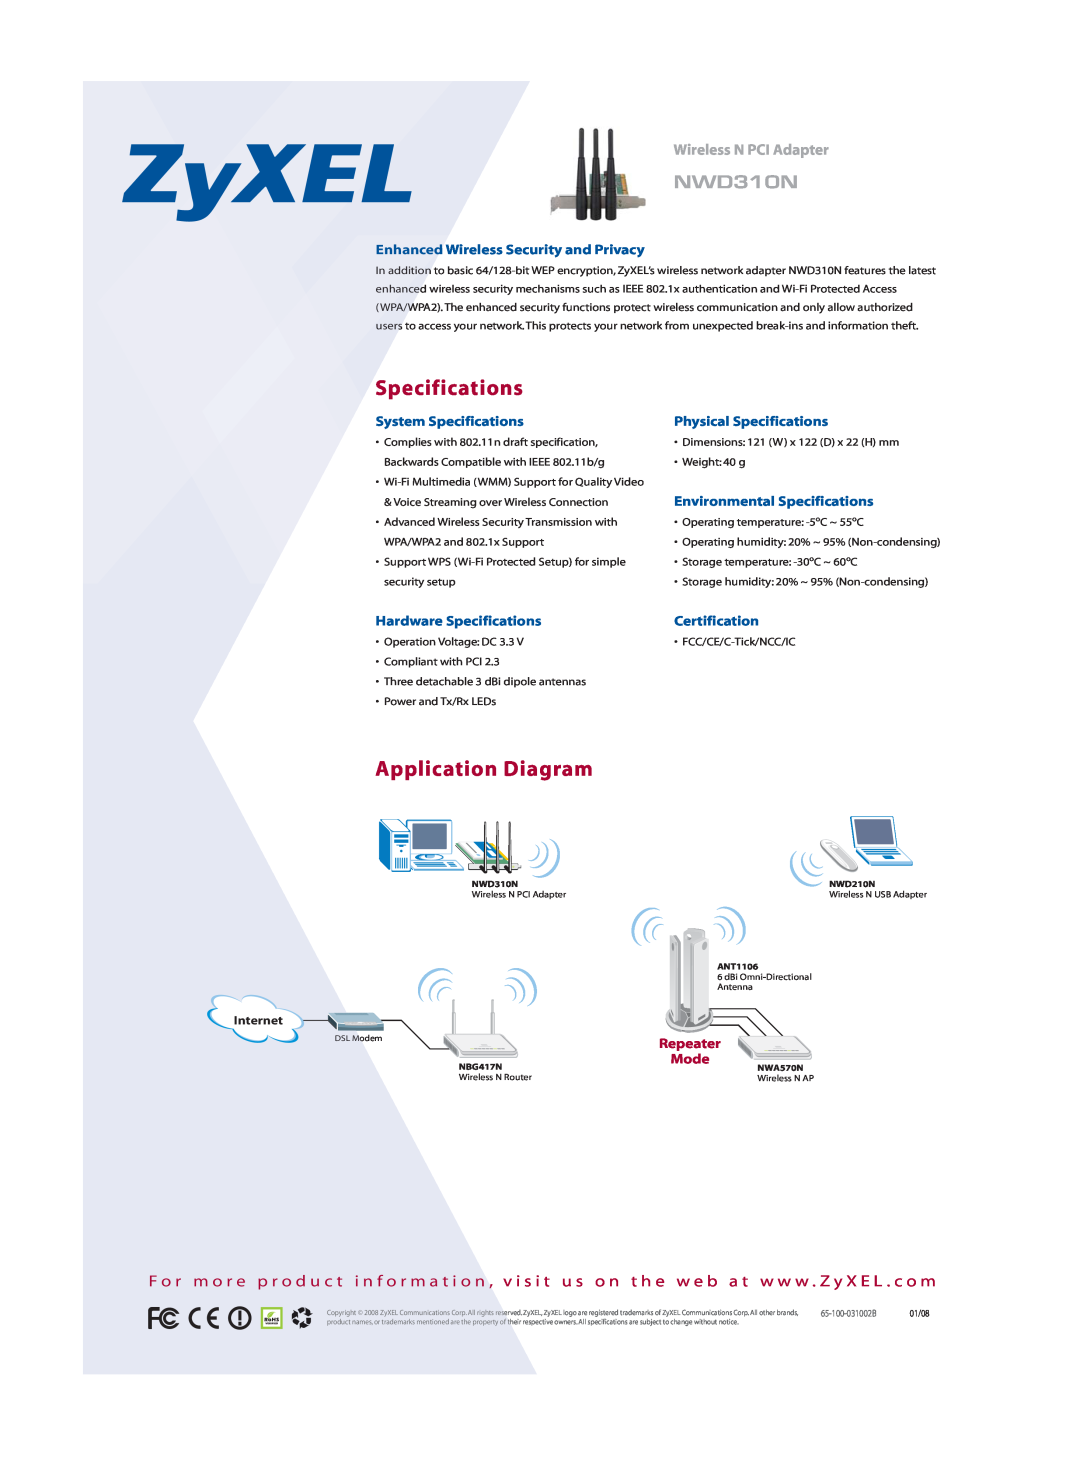 ZyXEL Communications NWD310N Specifications, Application Diagram, Enhanced Wireless Security and Privacy, Certification 